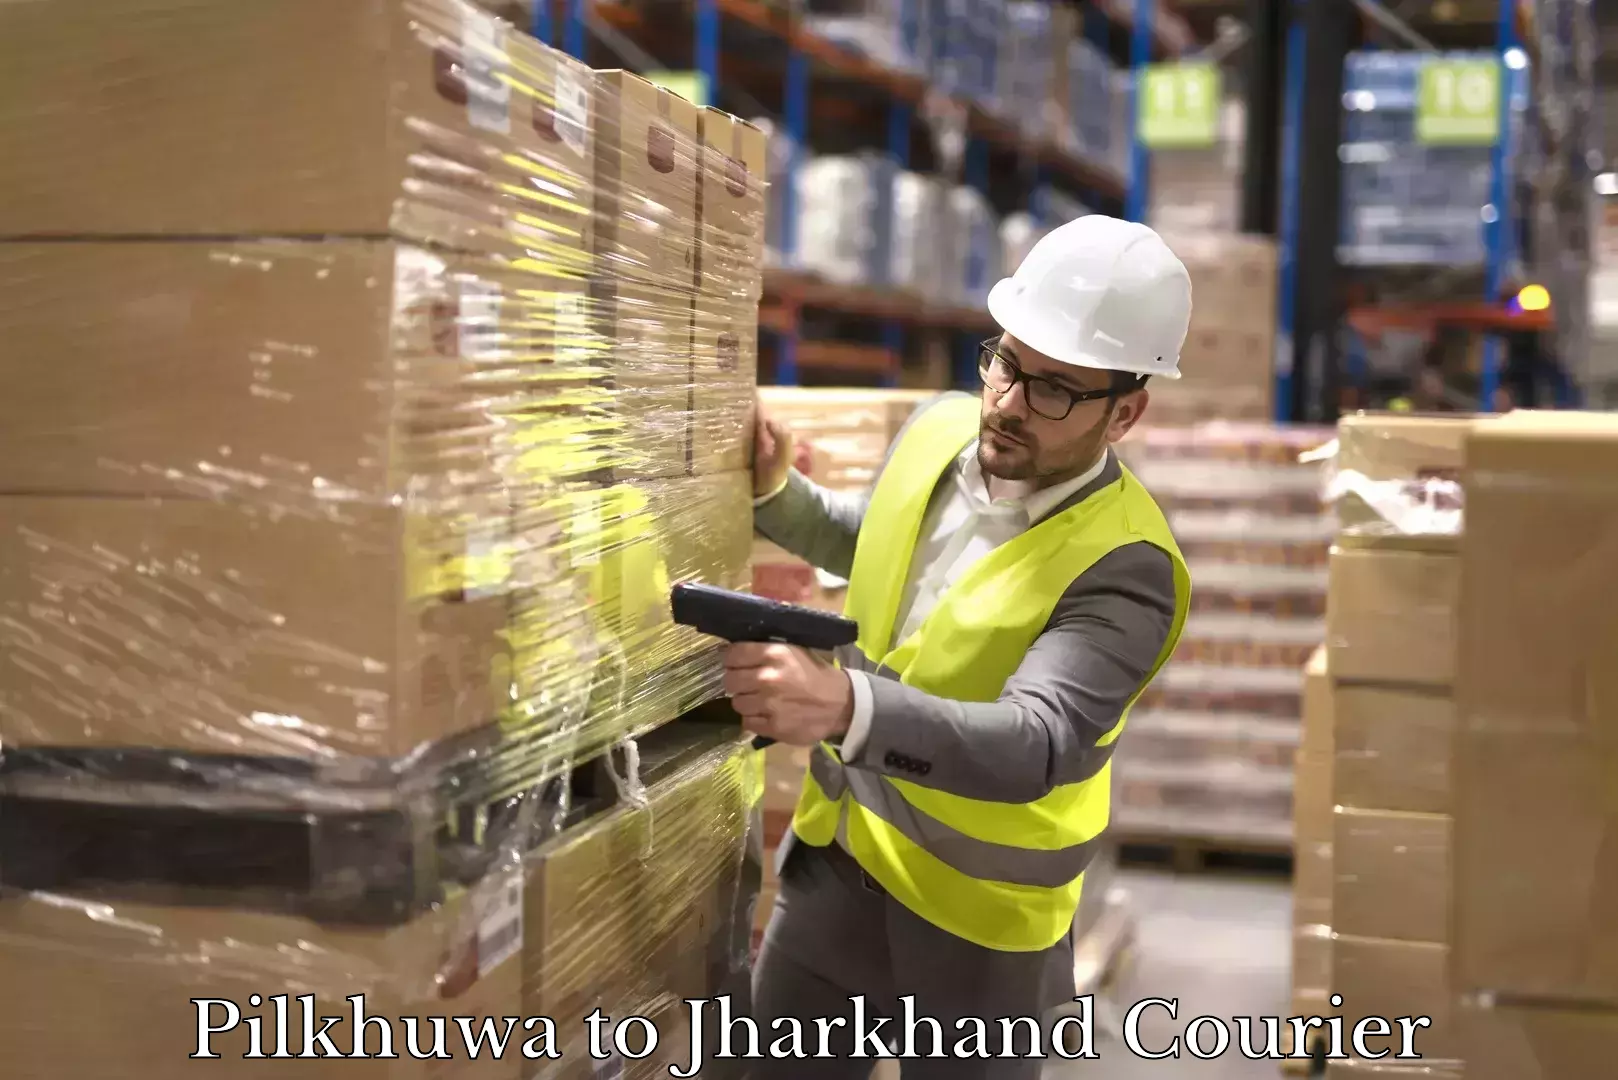 Efficient parcel service Pilkhuwa to Jharkhand